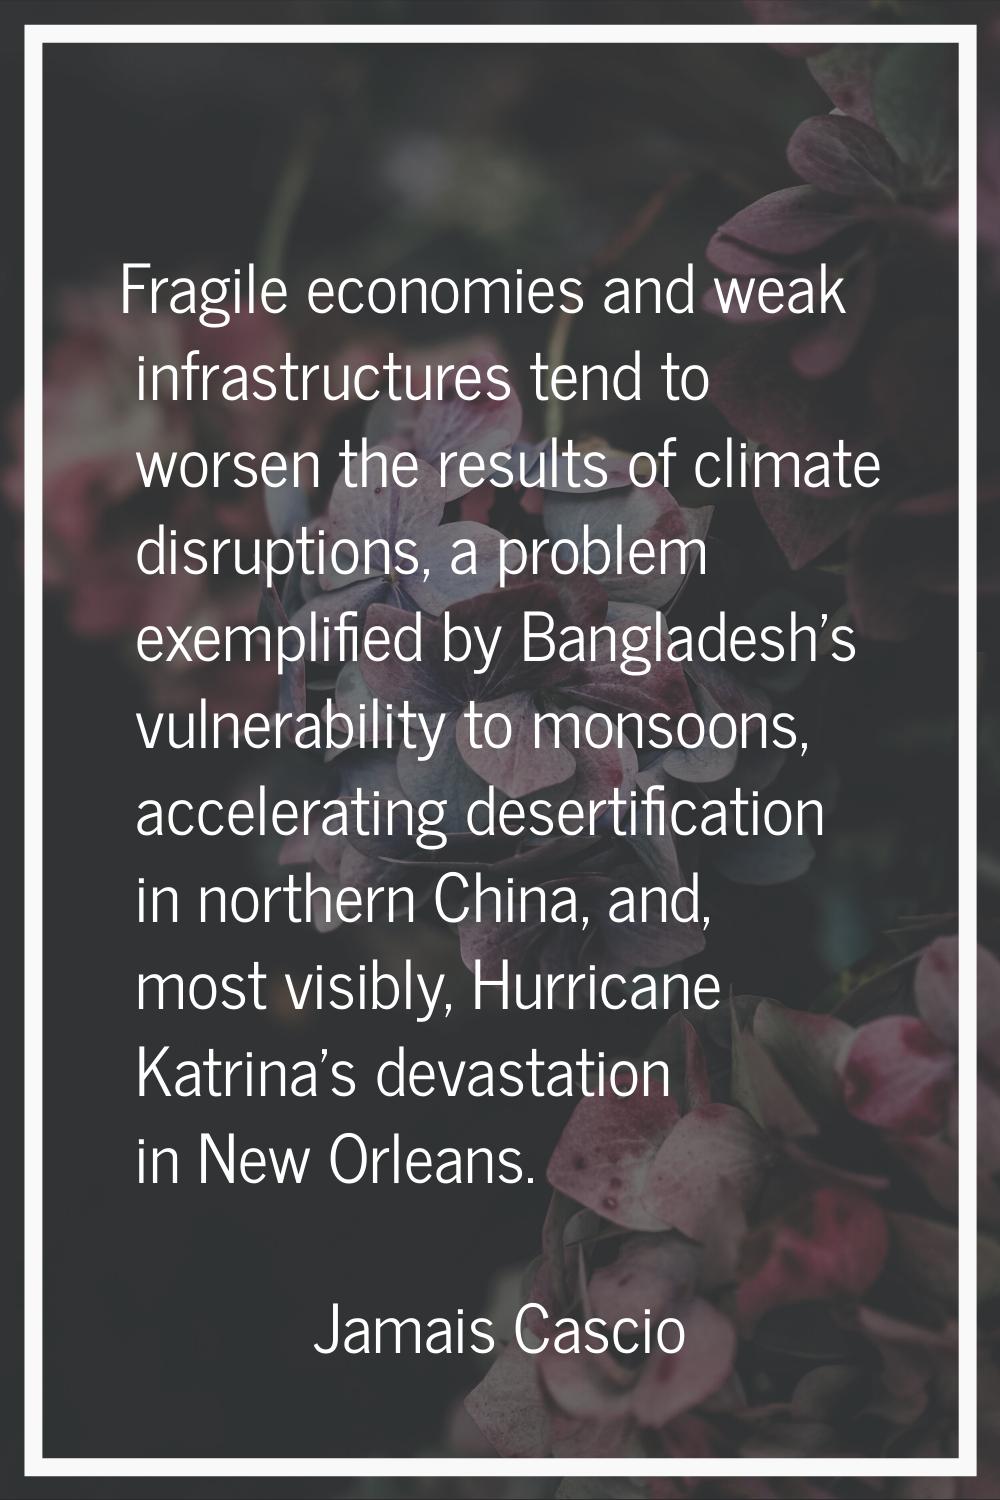 Fragile economies and weak infrastructures tend to worsen the results of climate disruptions, a pro